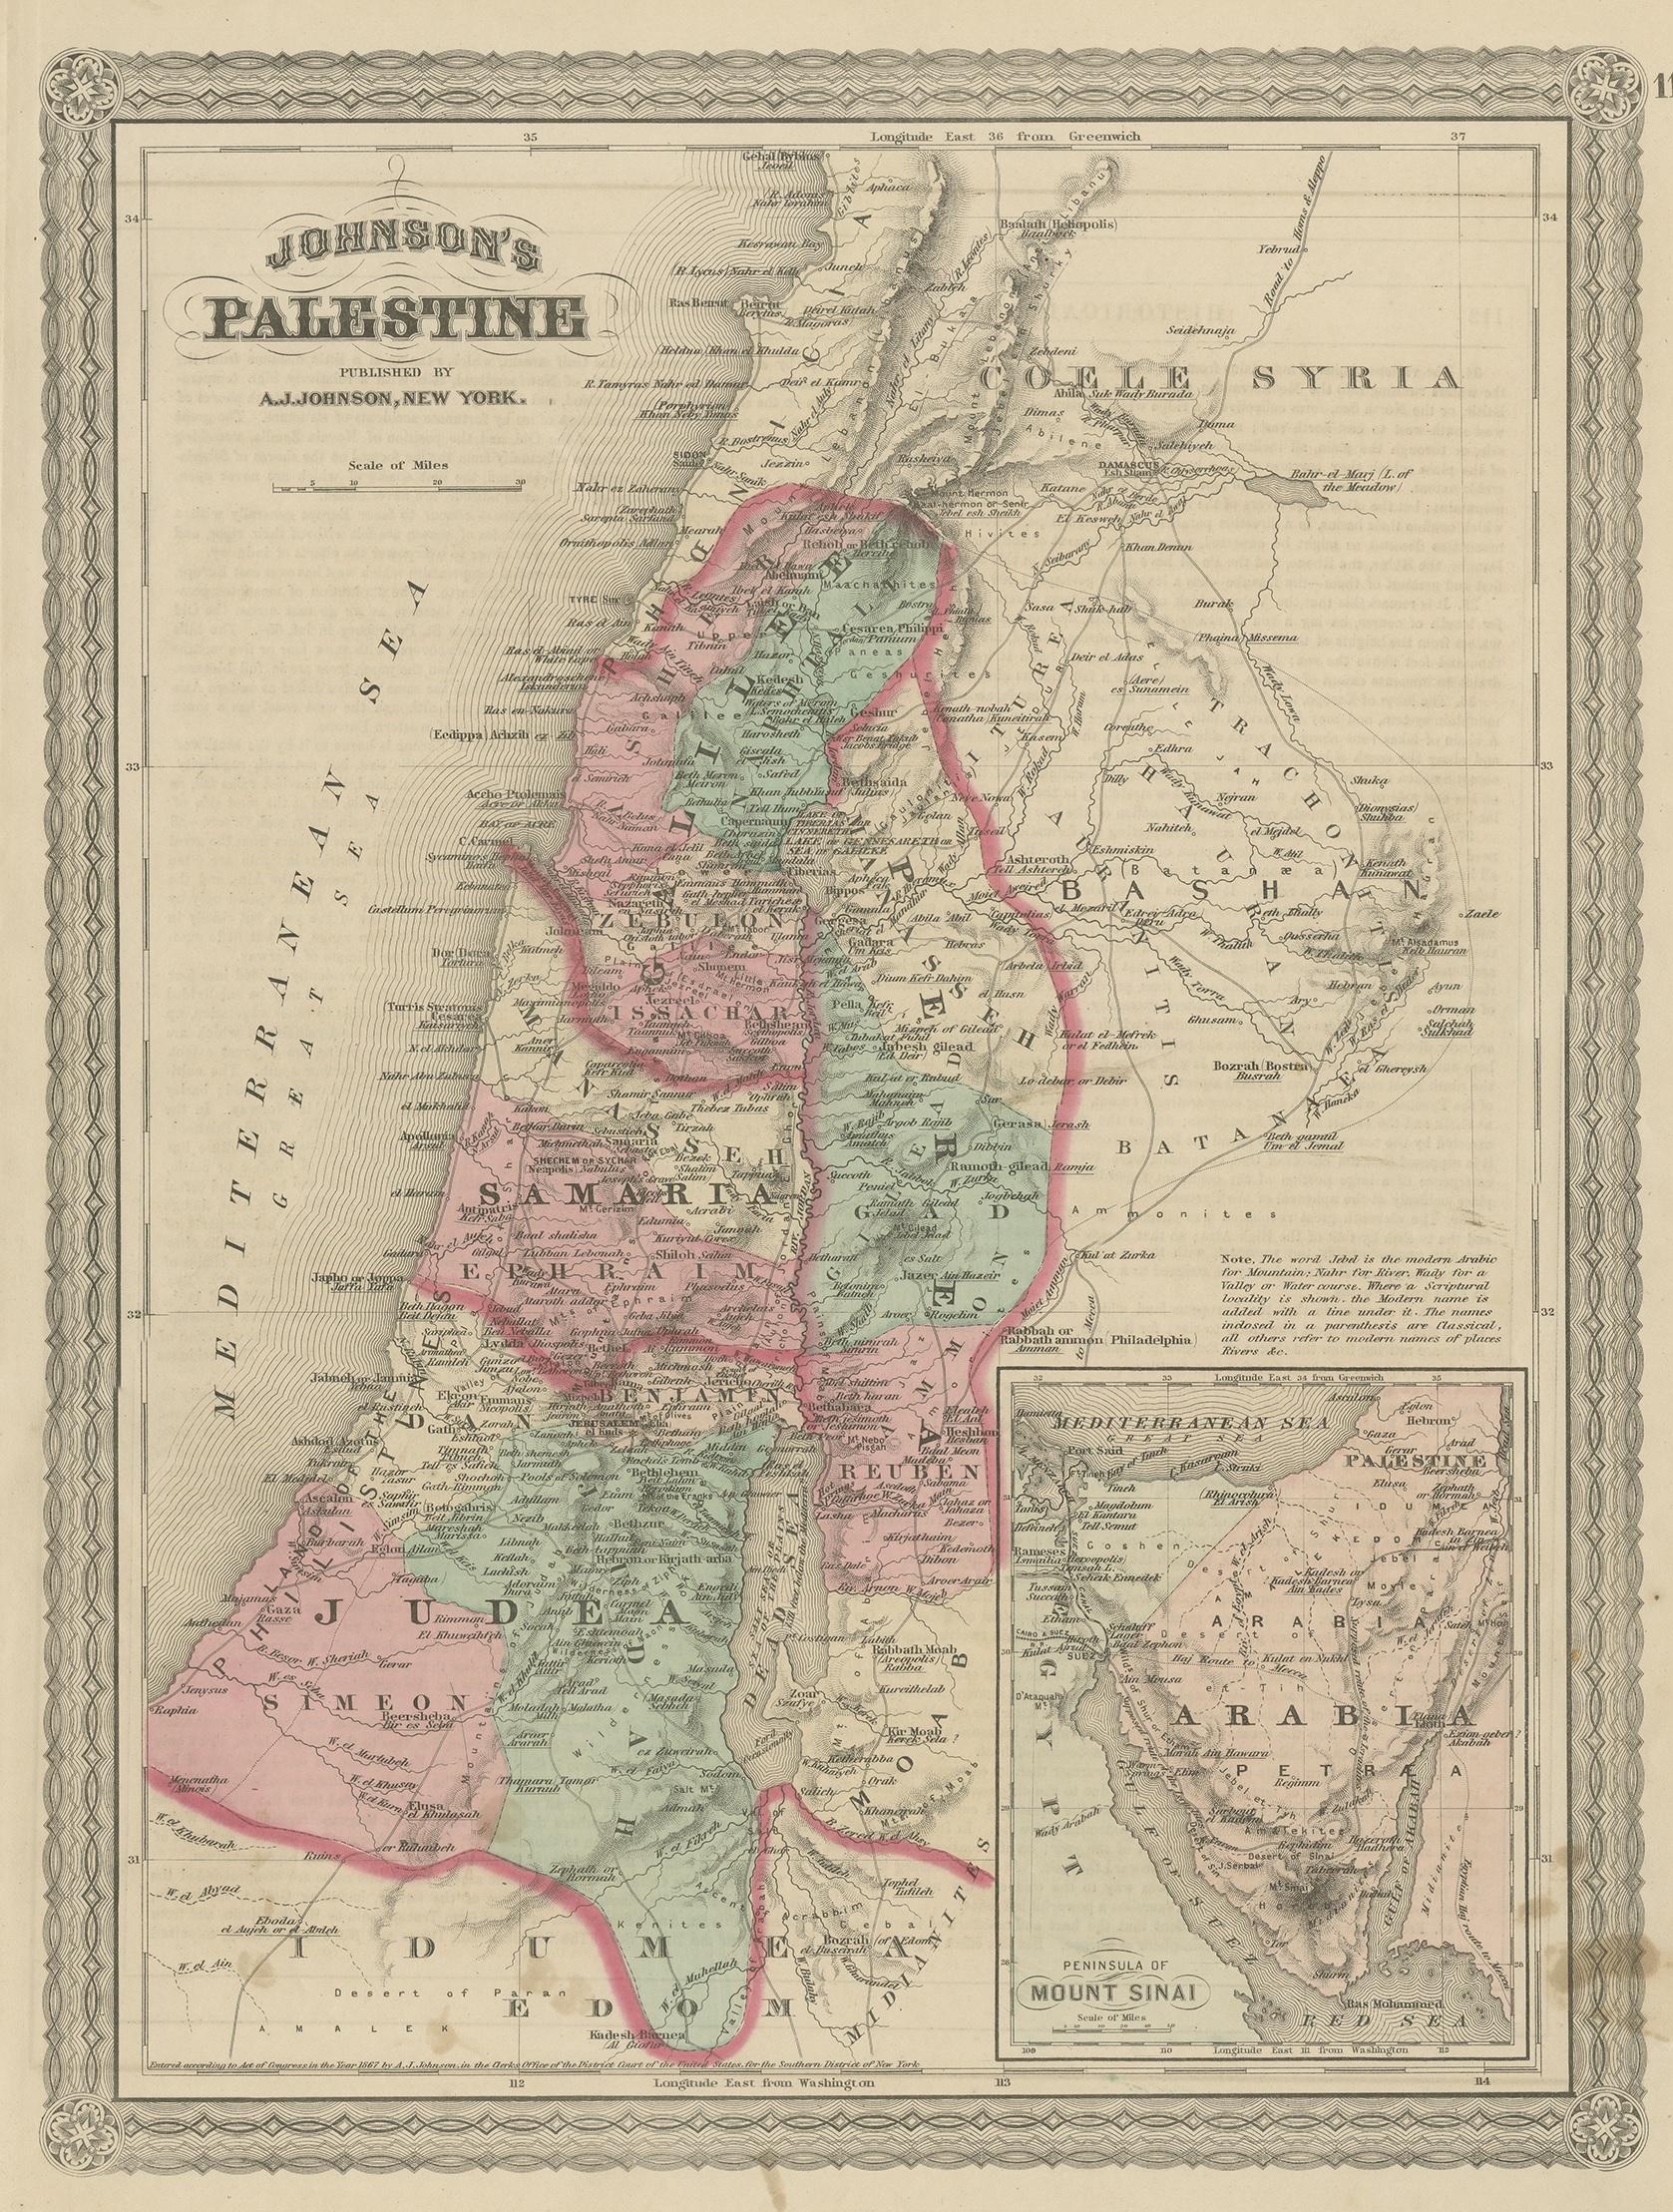 Antique map titled 'Johnson's Palestine'. Original map of Palestine, with an inset map of the peninsula of Mount Sinai. This map originates from 'Johnson's New Illustrated Family Atlas of the World' by A.J. Johnson. Published 1872.